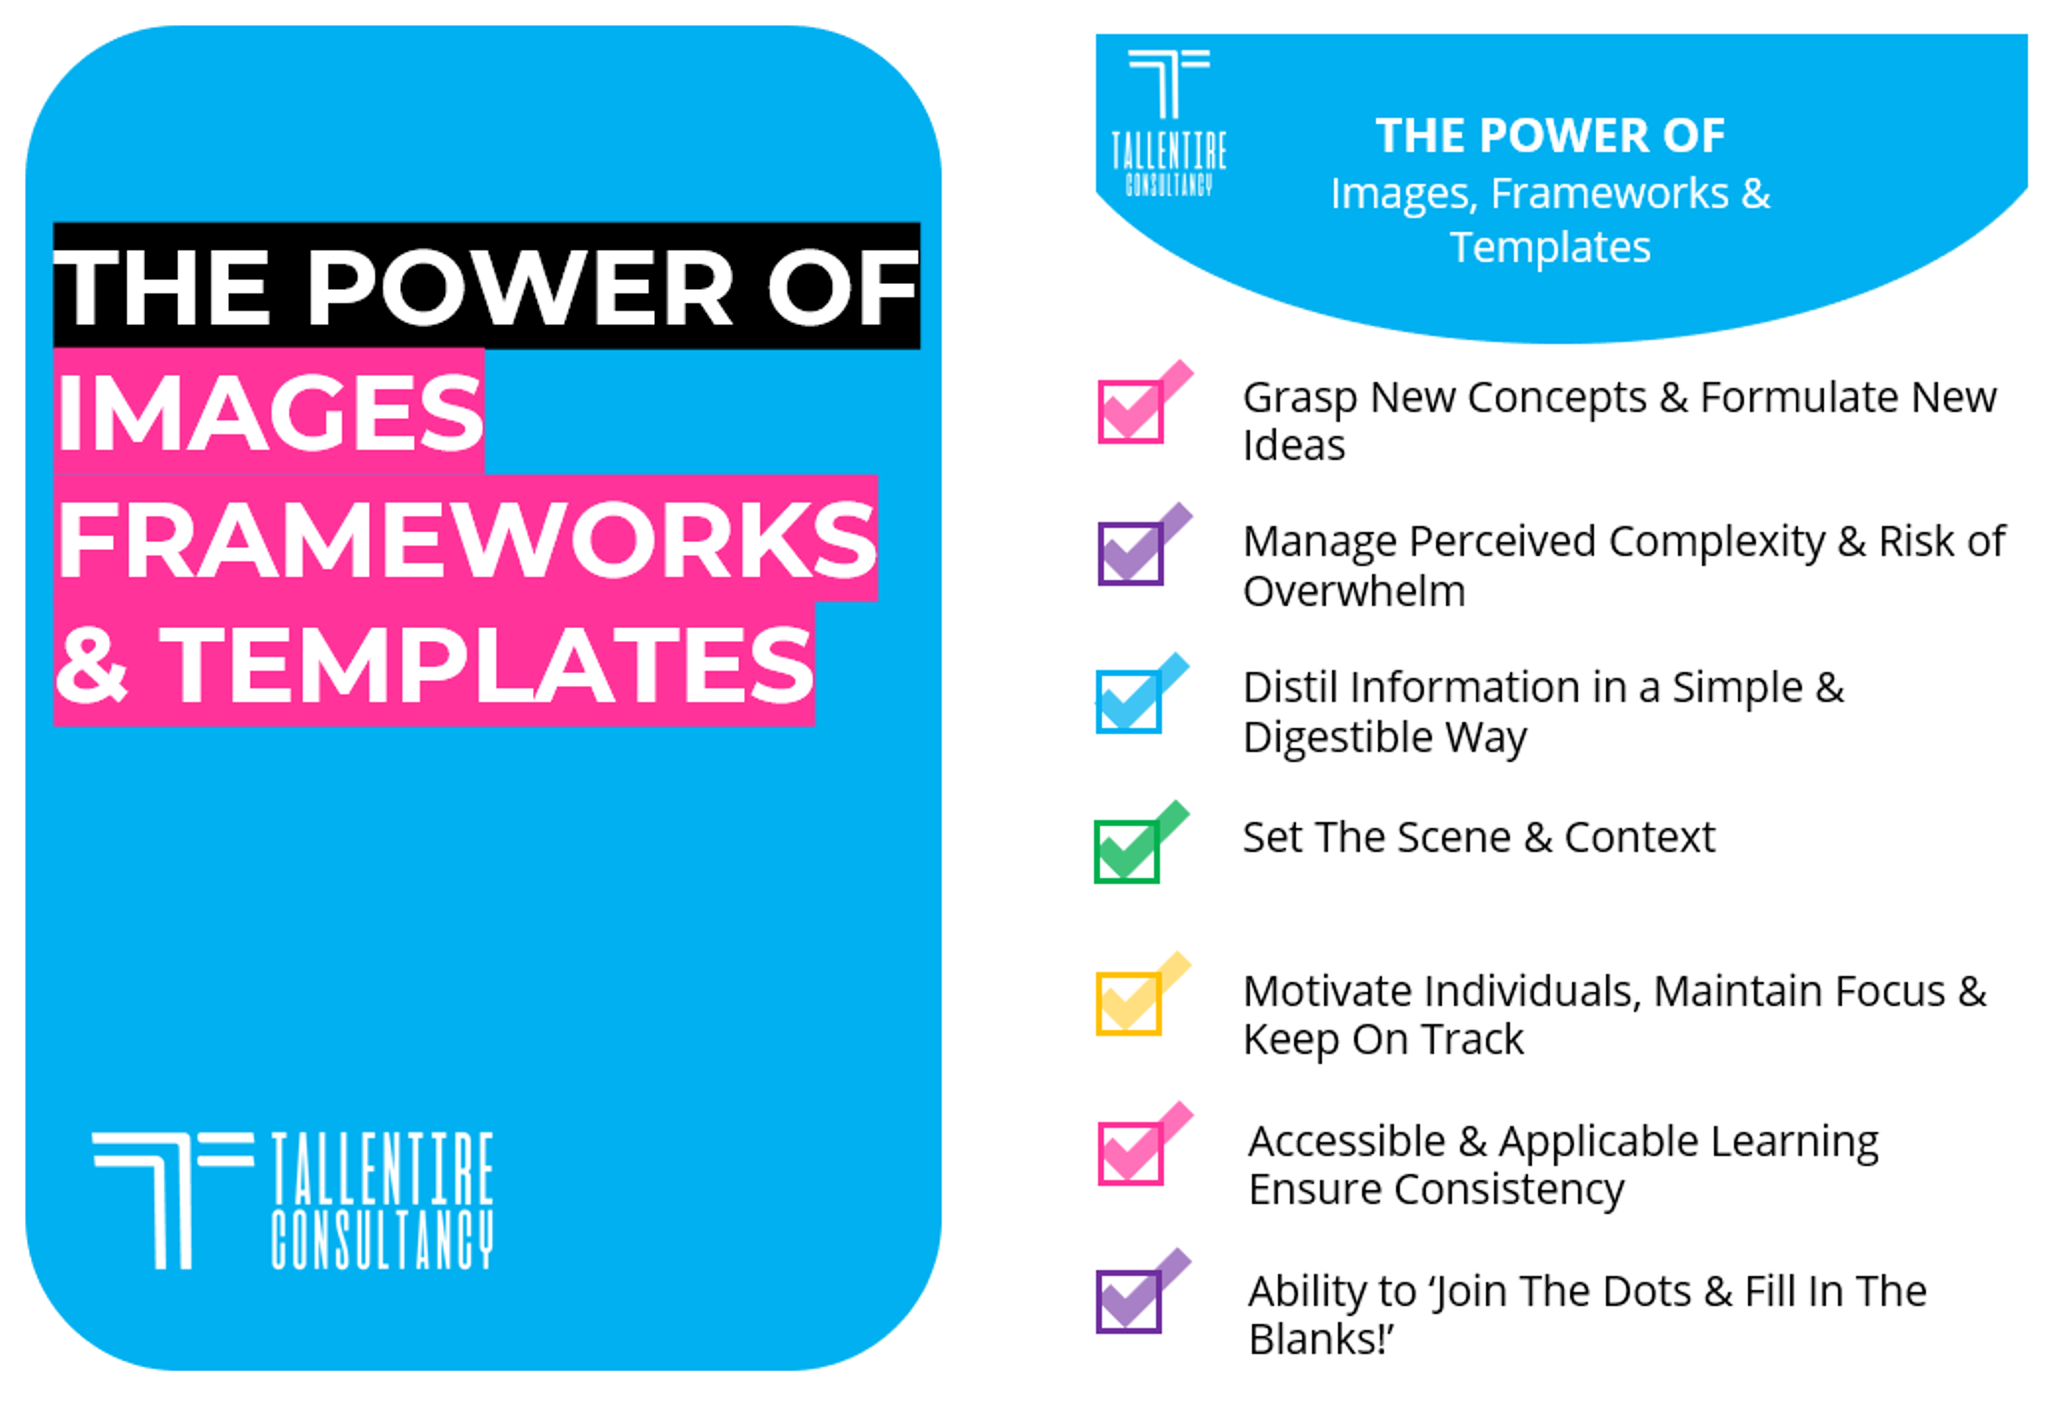 The Power of Images, Frameworks & Templates's Image